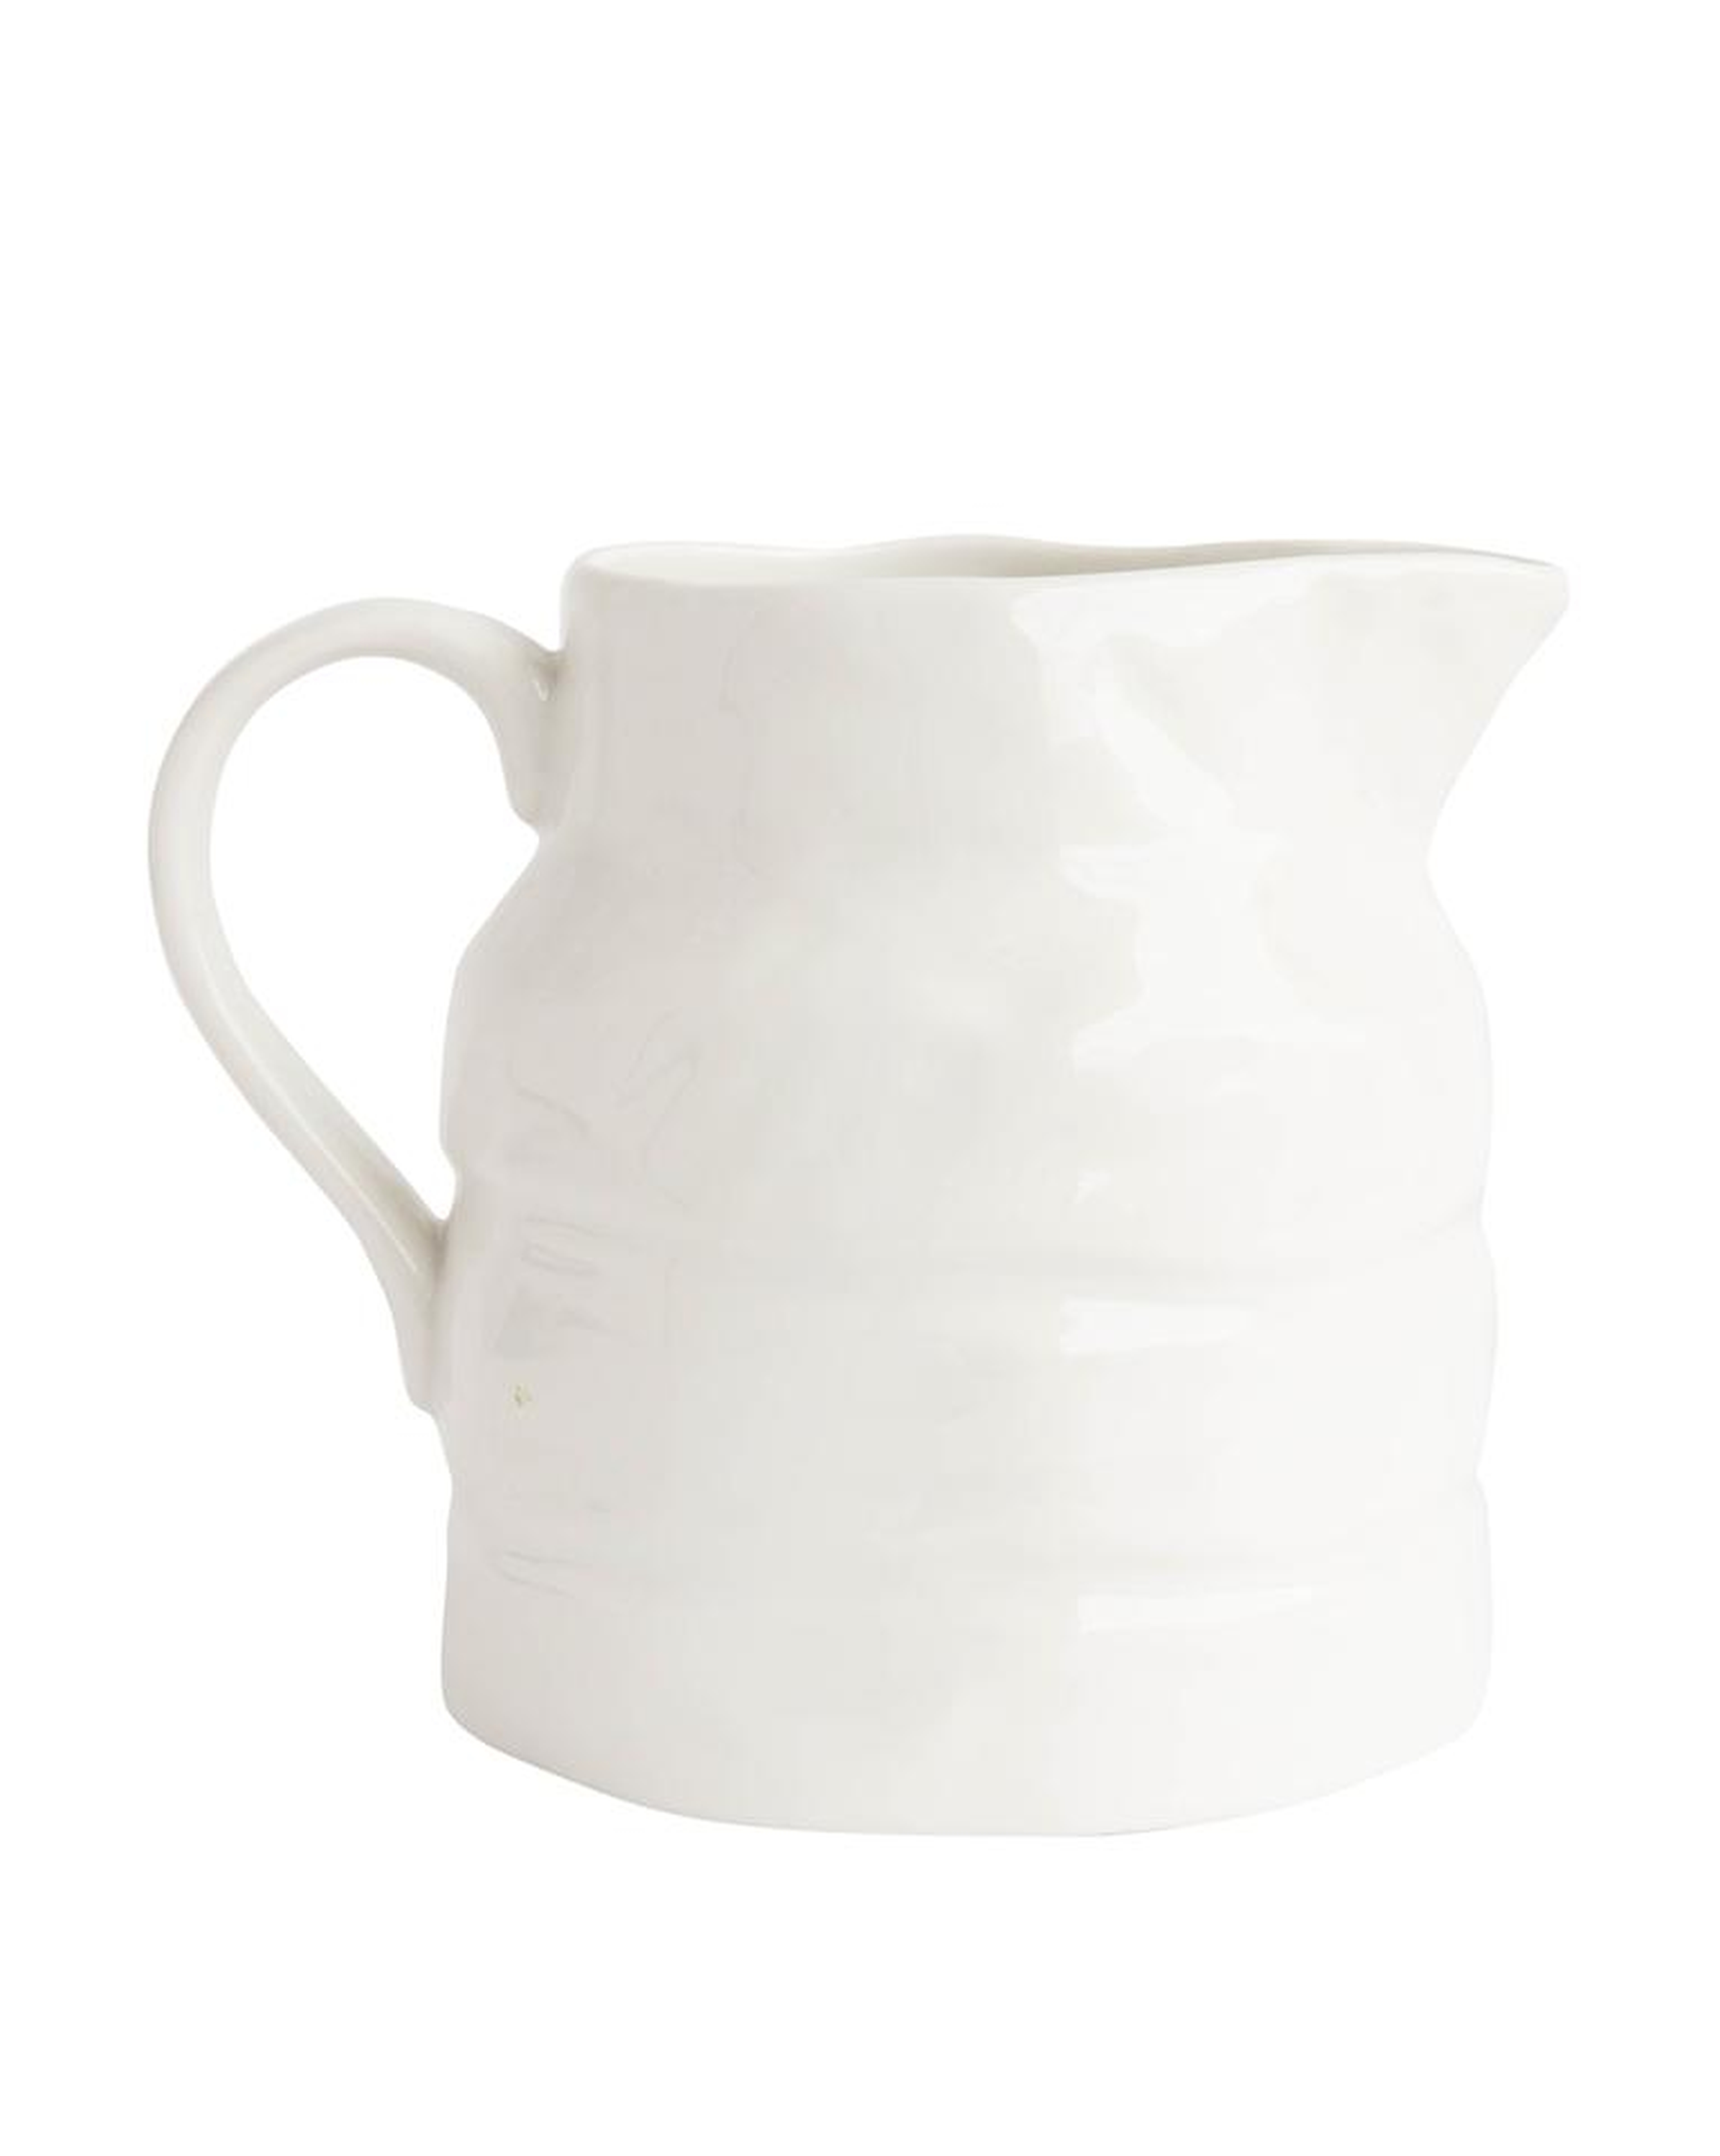 CLASSIC WHITE PITCHER - McGee & Co.